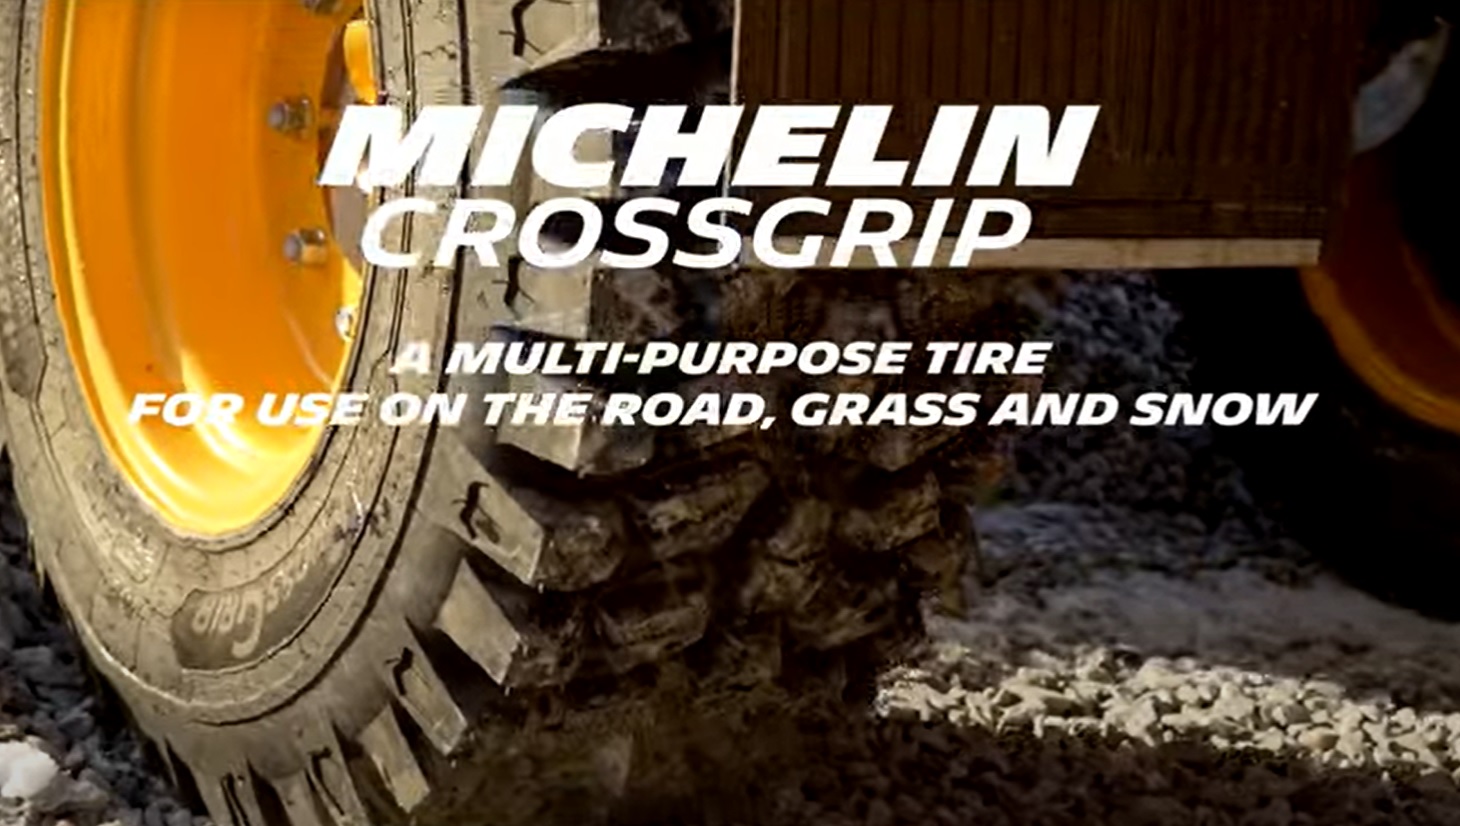 Michelin - 2021 Movin'On: Michelin presents two innovations to accelerate  the development of sustainable mobility